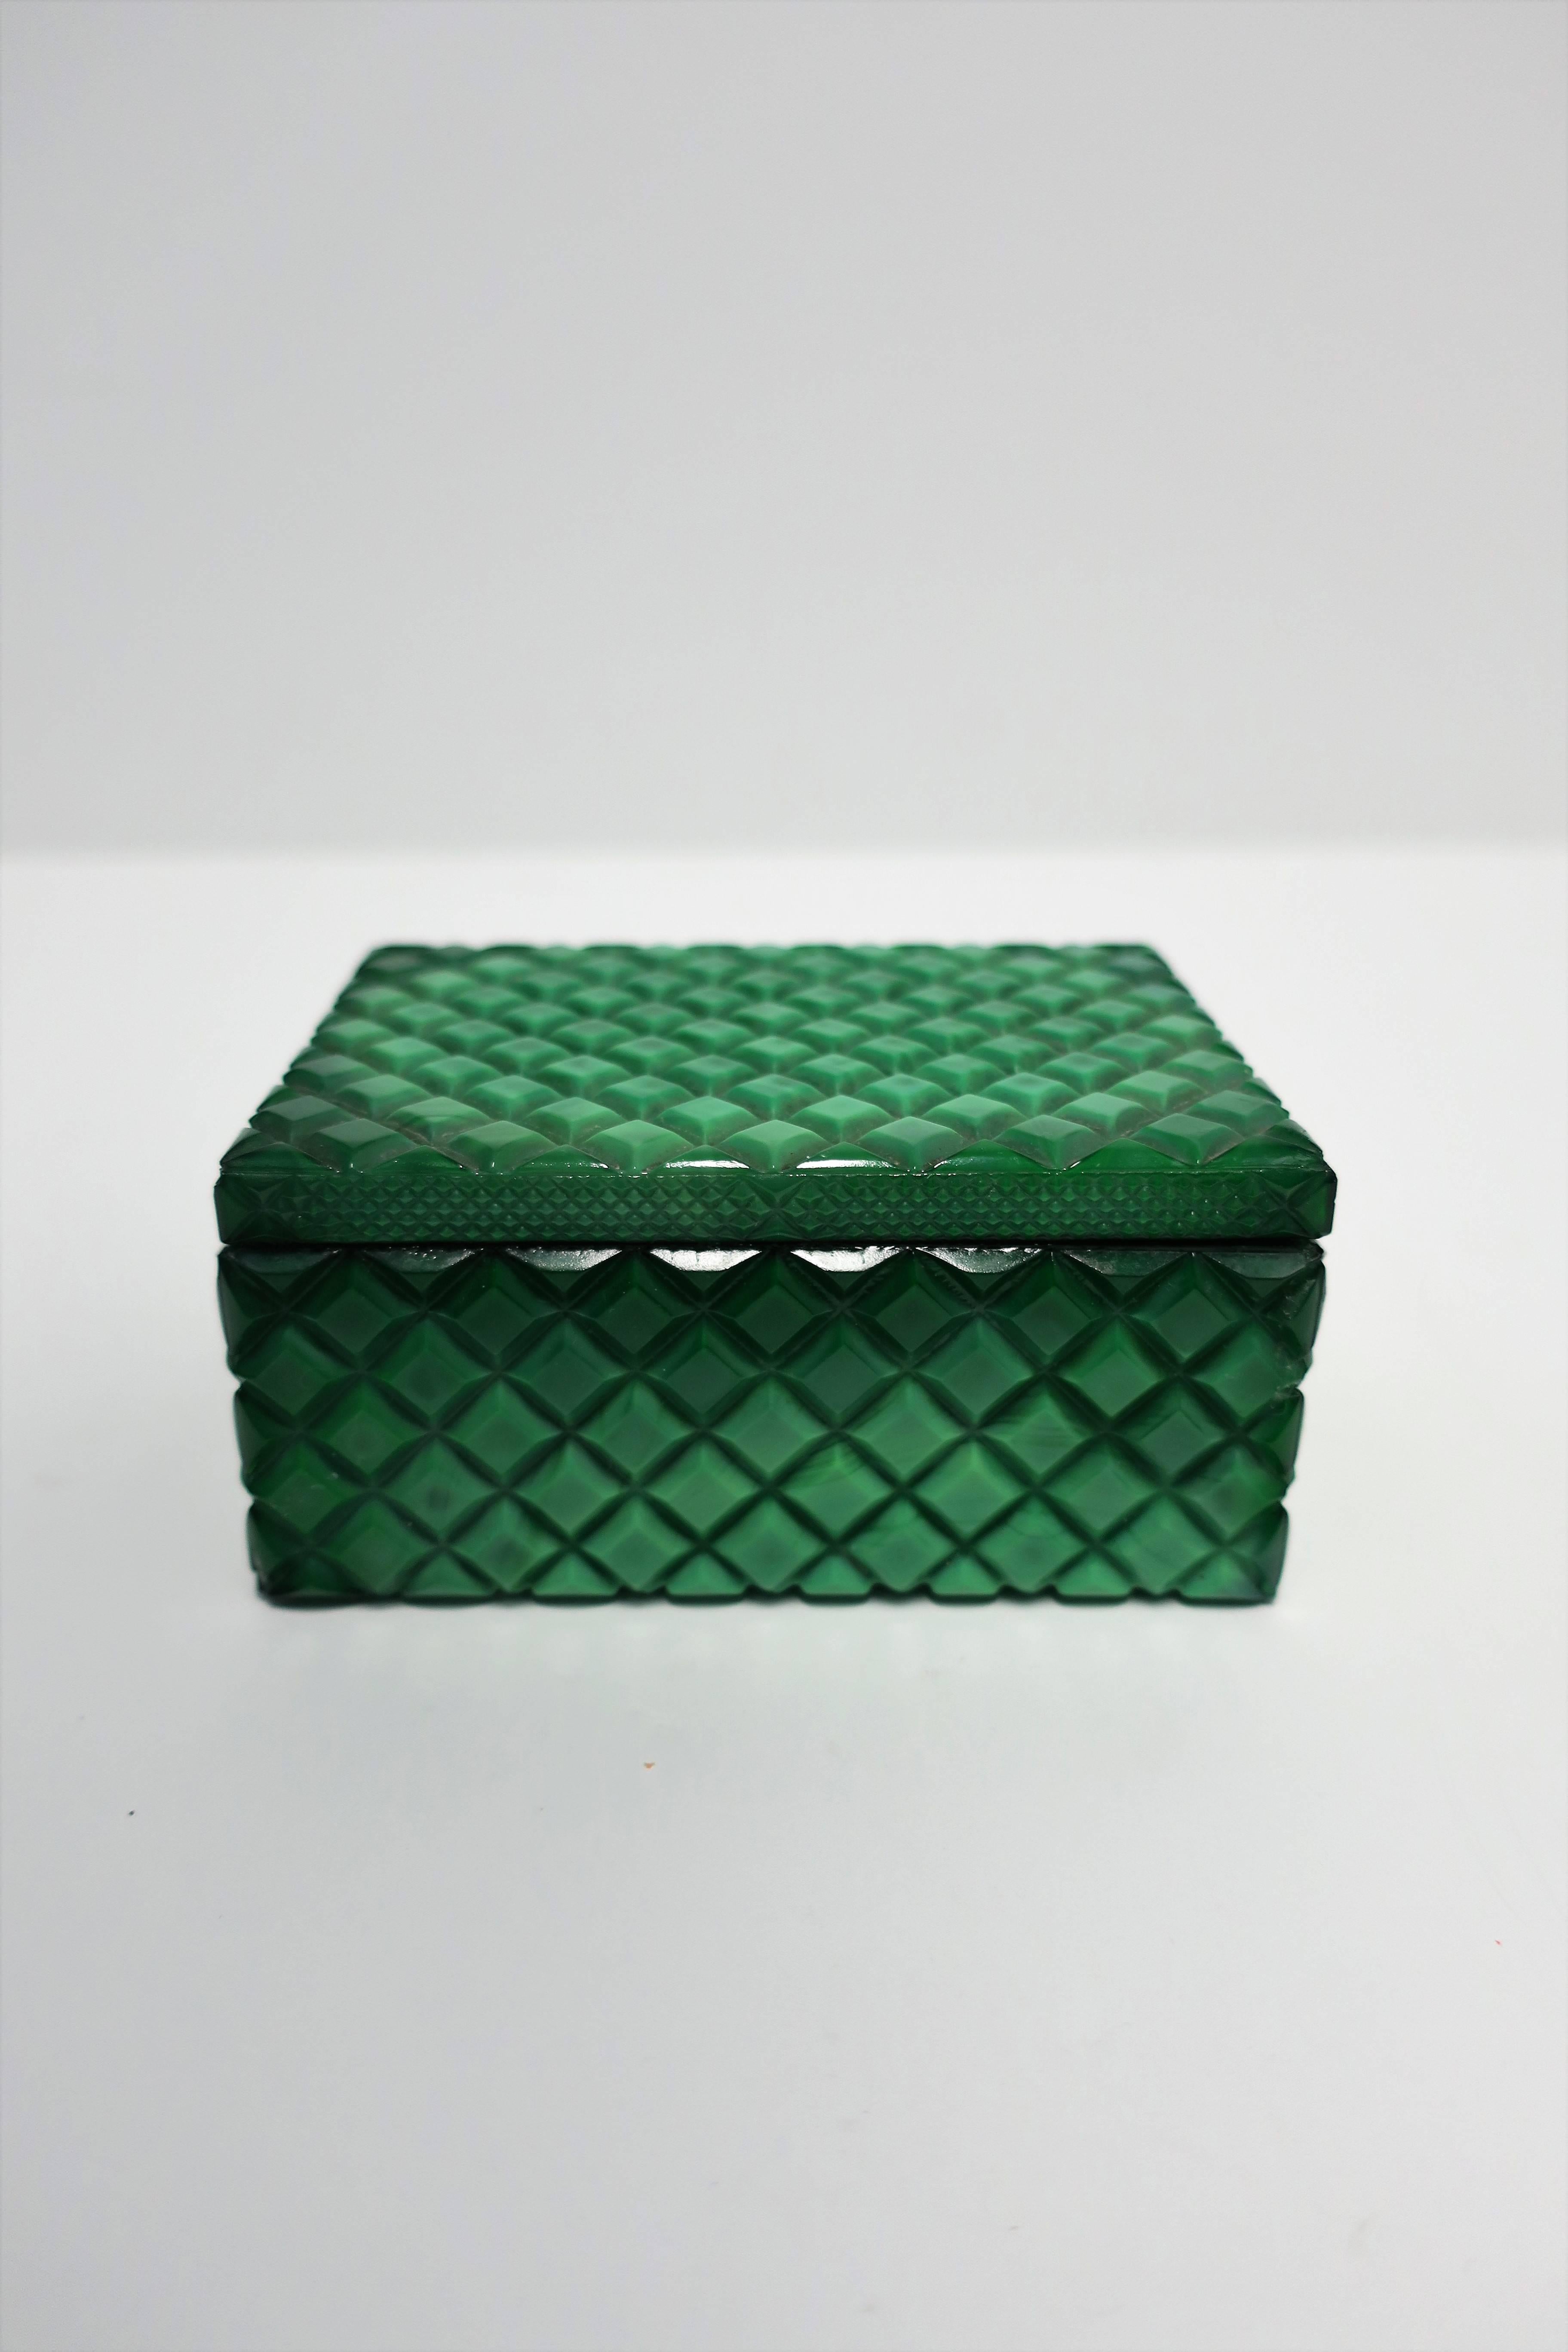 A vintage 'malachite green style' rectangular glass box with quilted diamond design. Box can hold jewelry or other items. Box available here online. By request, box can be made available by appointment to the Trade in New York.